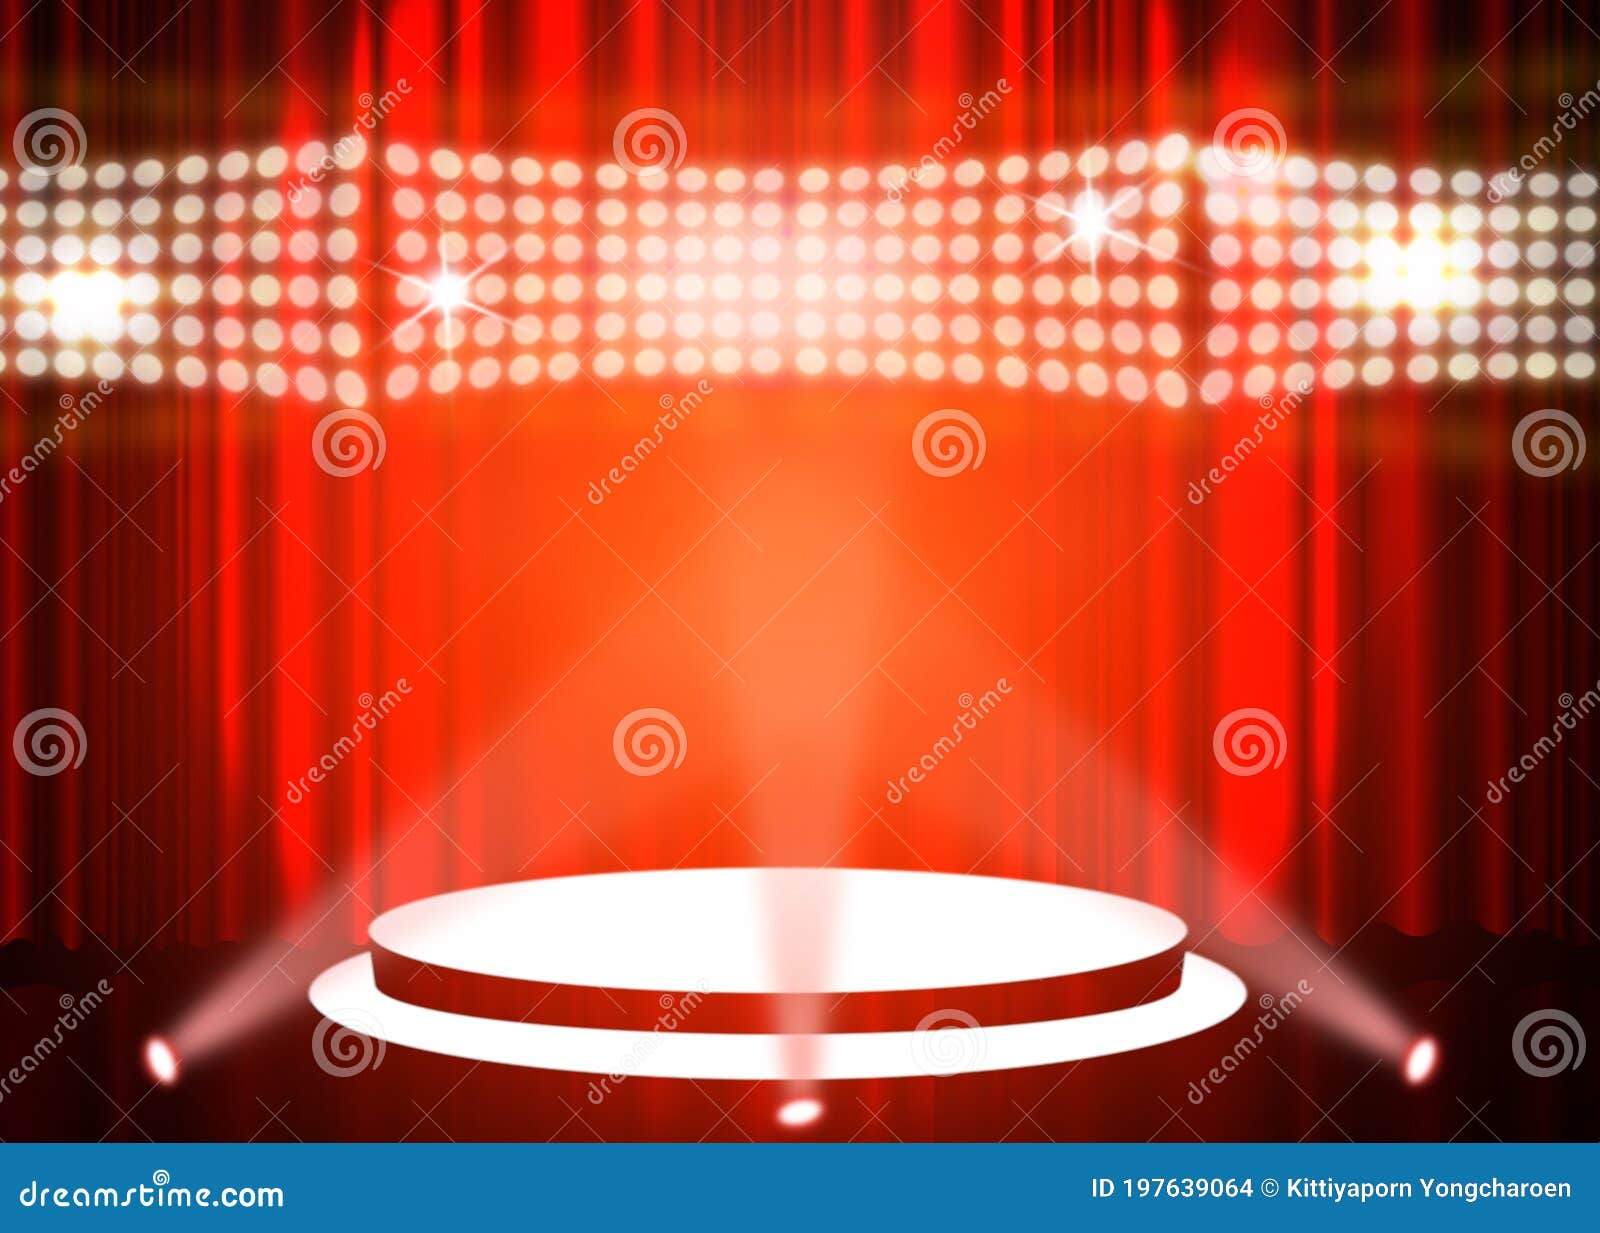 Stage Background with Spot Lights Shining on the Floor,ready for Show and  Concert in Stadium. Stock Illustration - Illustration of lights, dark:  197639064